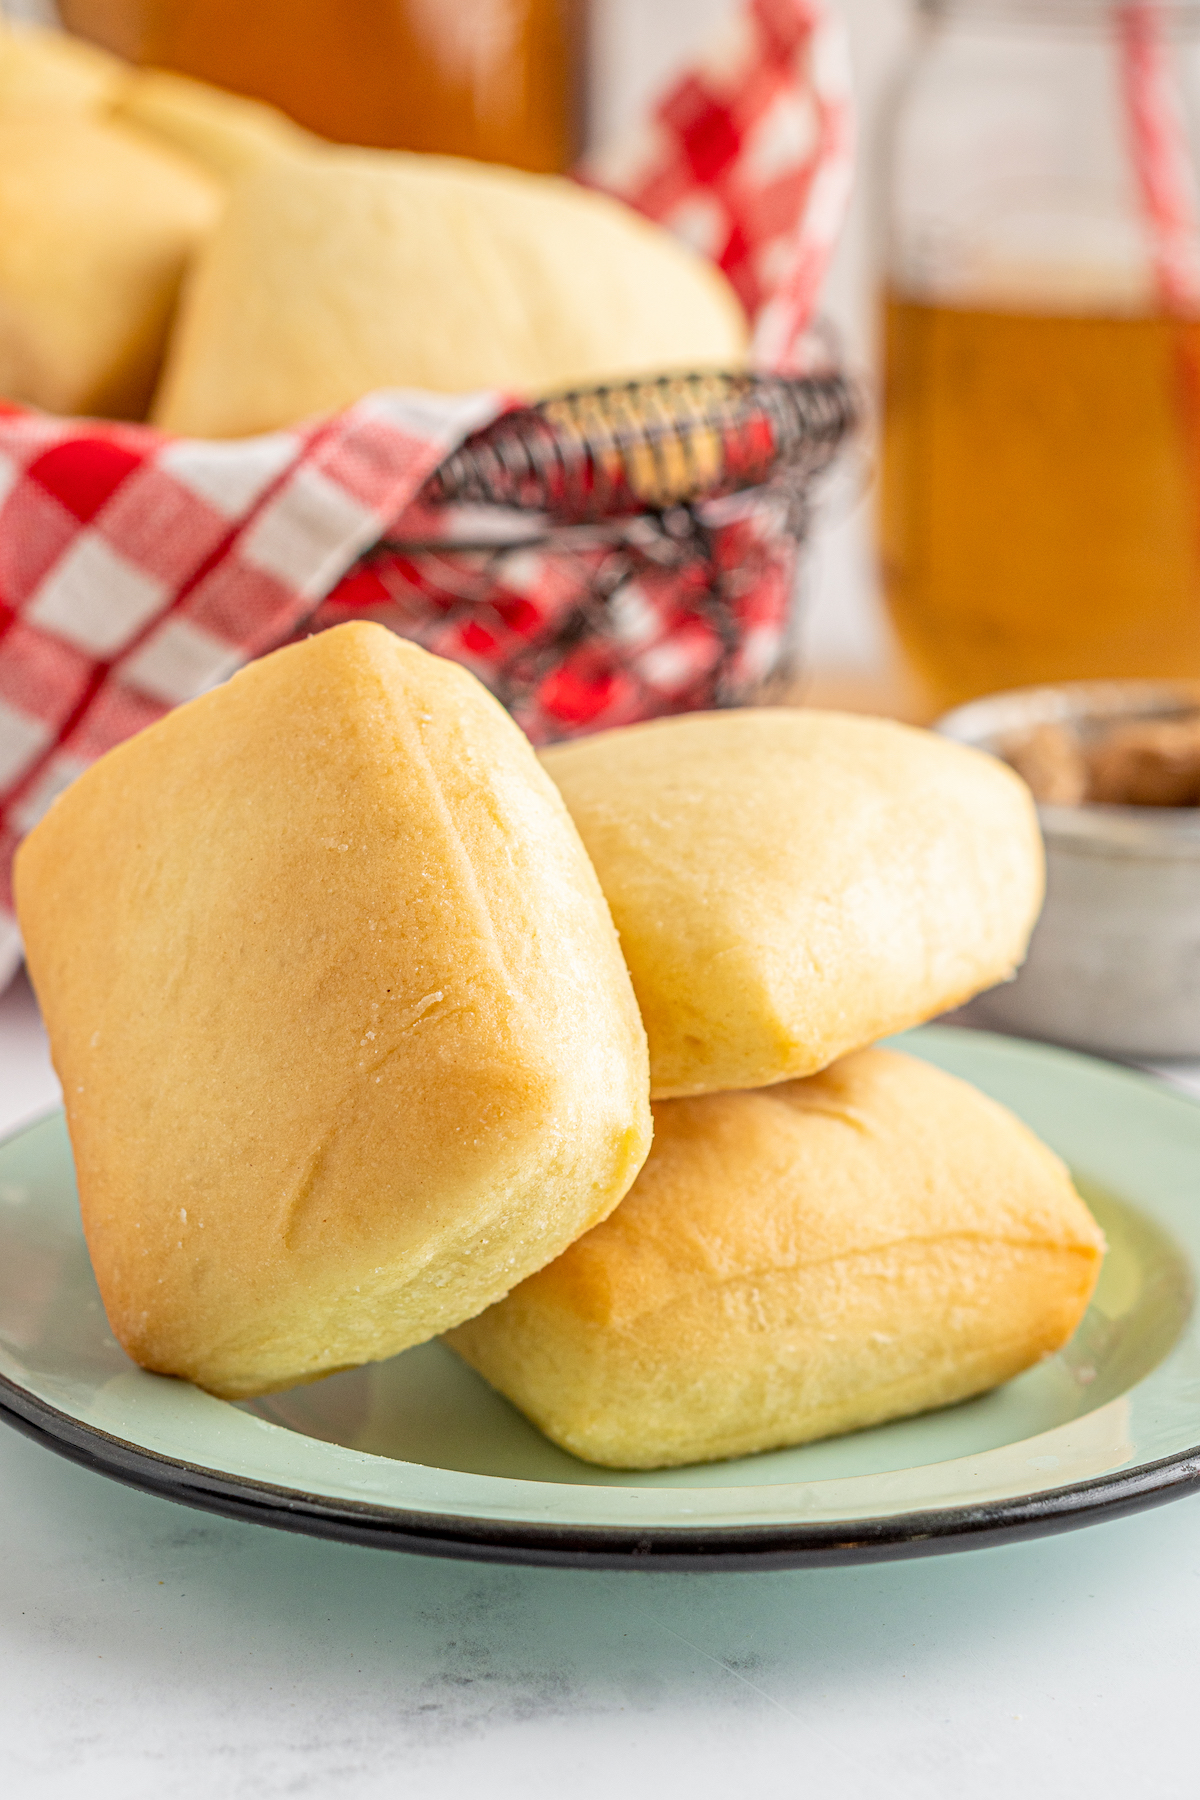 Soft, baked Texas Roadhouse rolls on a plate.